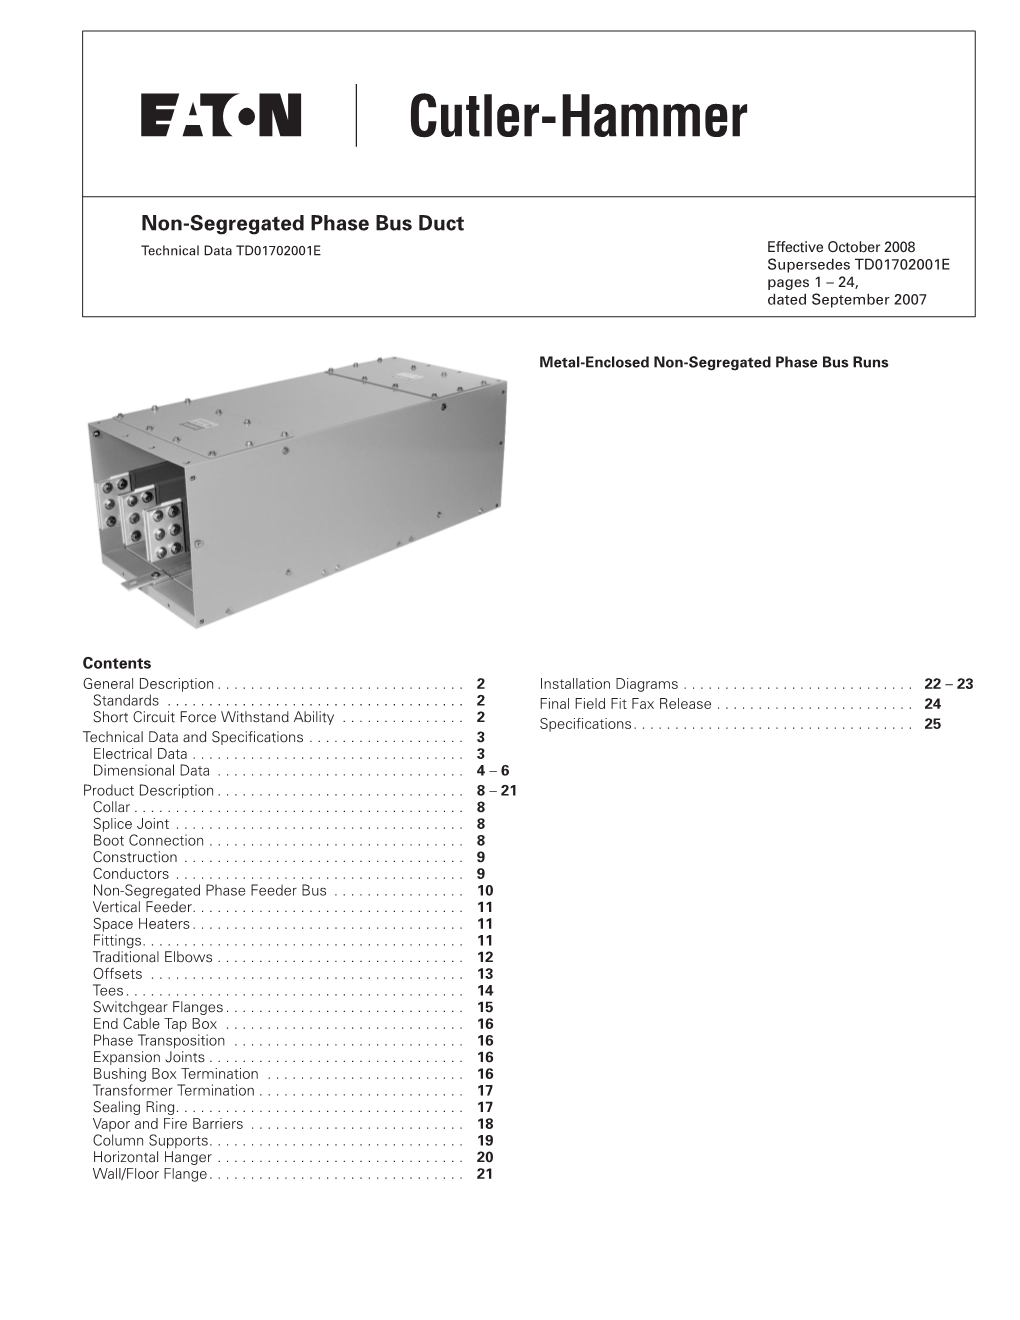 Non-Segregated Phase Bus Duct Technical Data TD01702001E Effective October 2008 Supersedes TD01702001E Pages 1 – 24, Dated September 2007